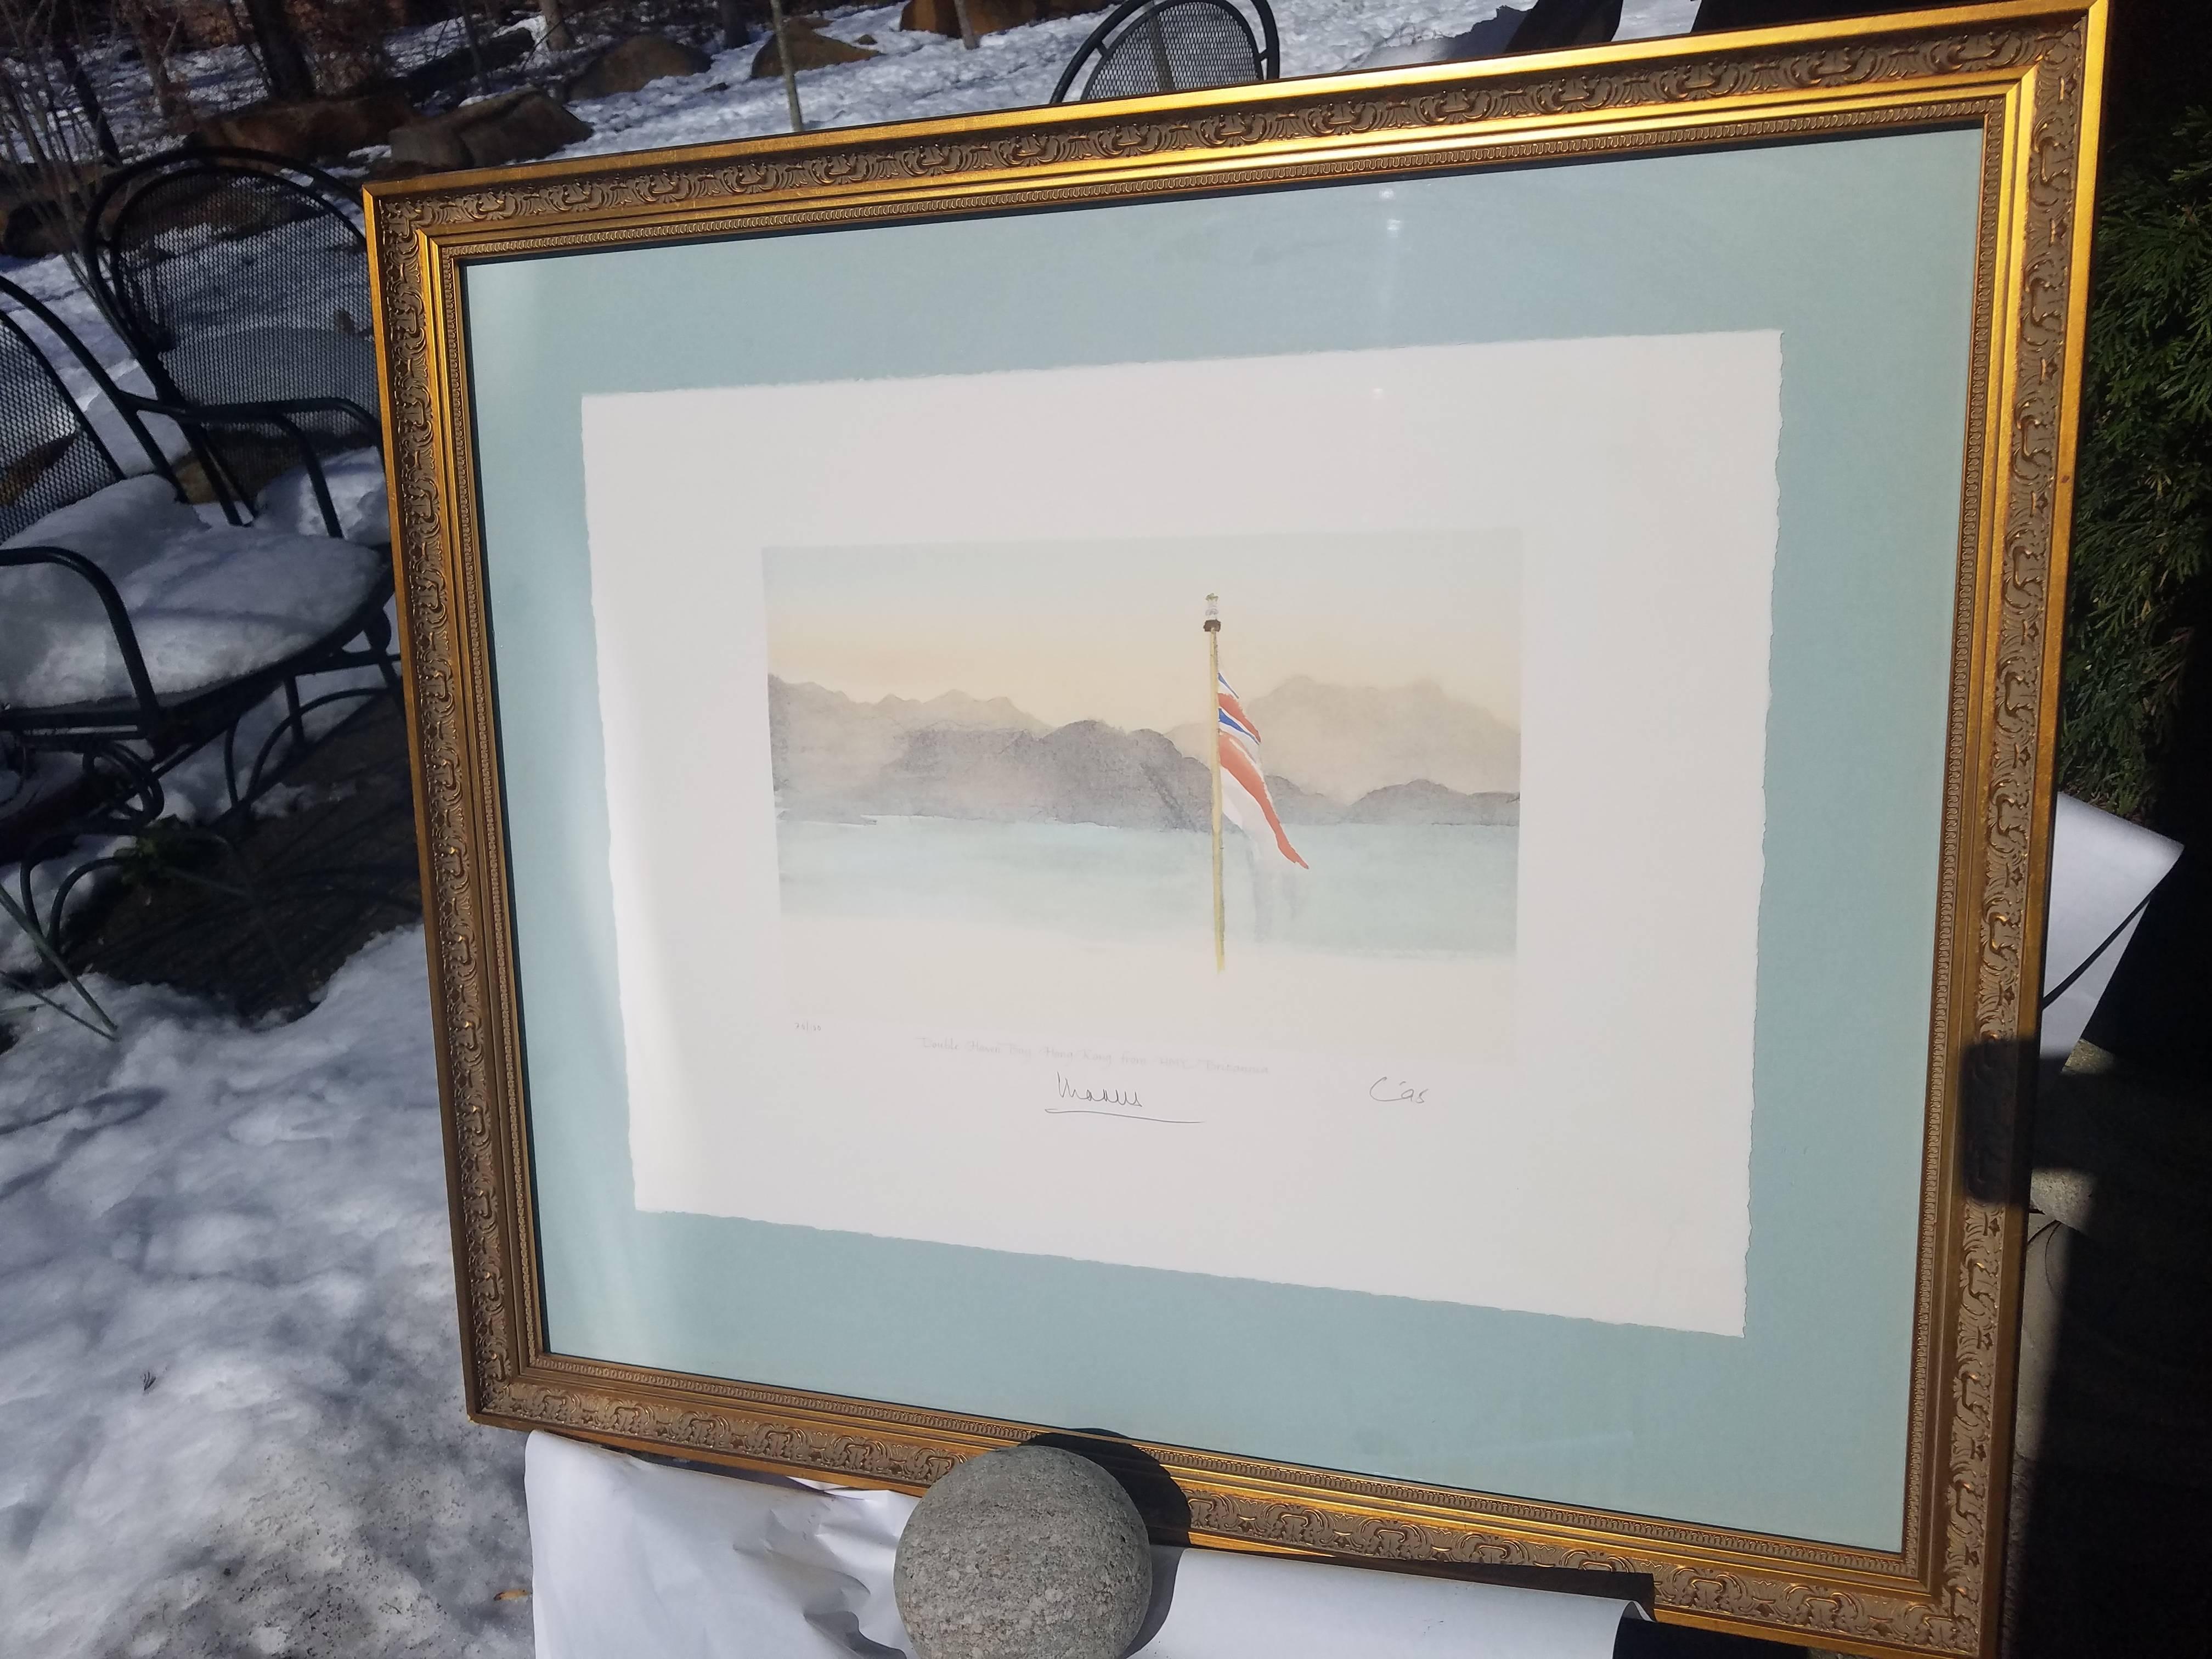 A mint-condition lithograph (#70 of 200) by HRH Charles, Prince of Wales,
titled 